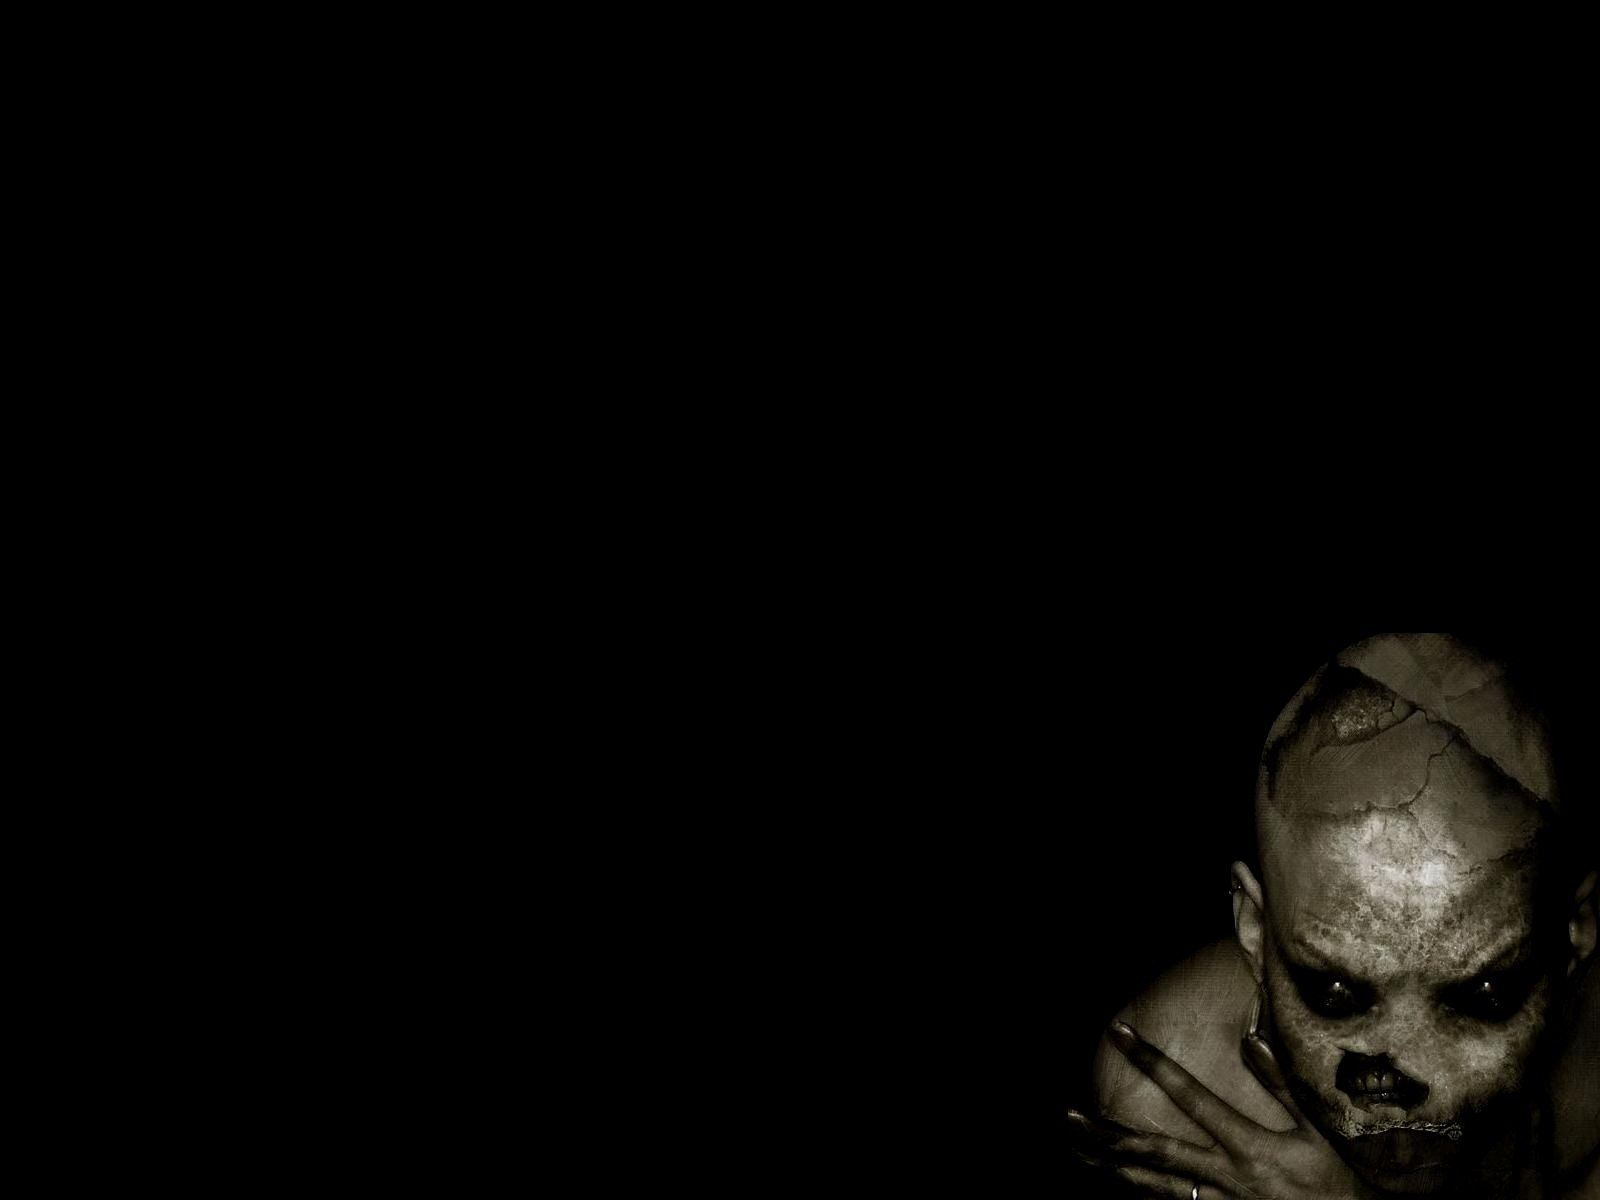 Zombie wallpaper 1600x1200 - (#31915) - High Quality and ...